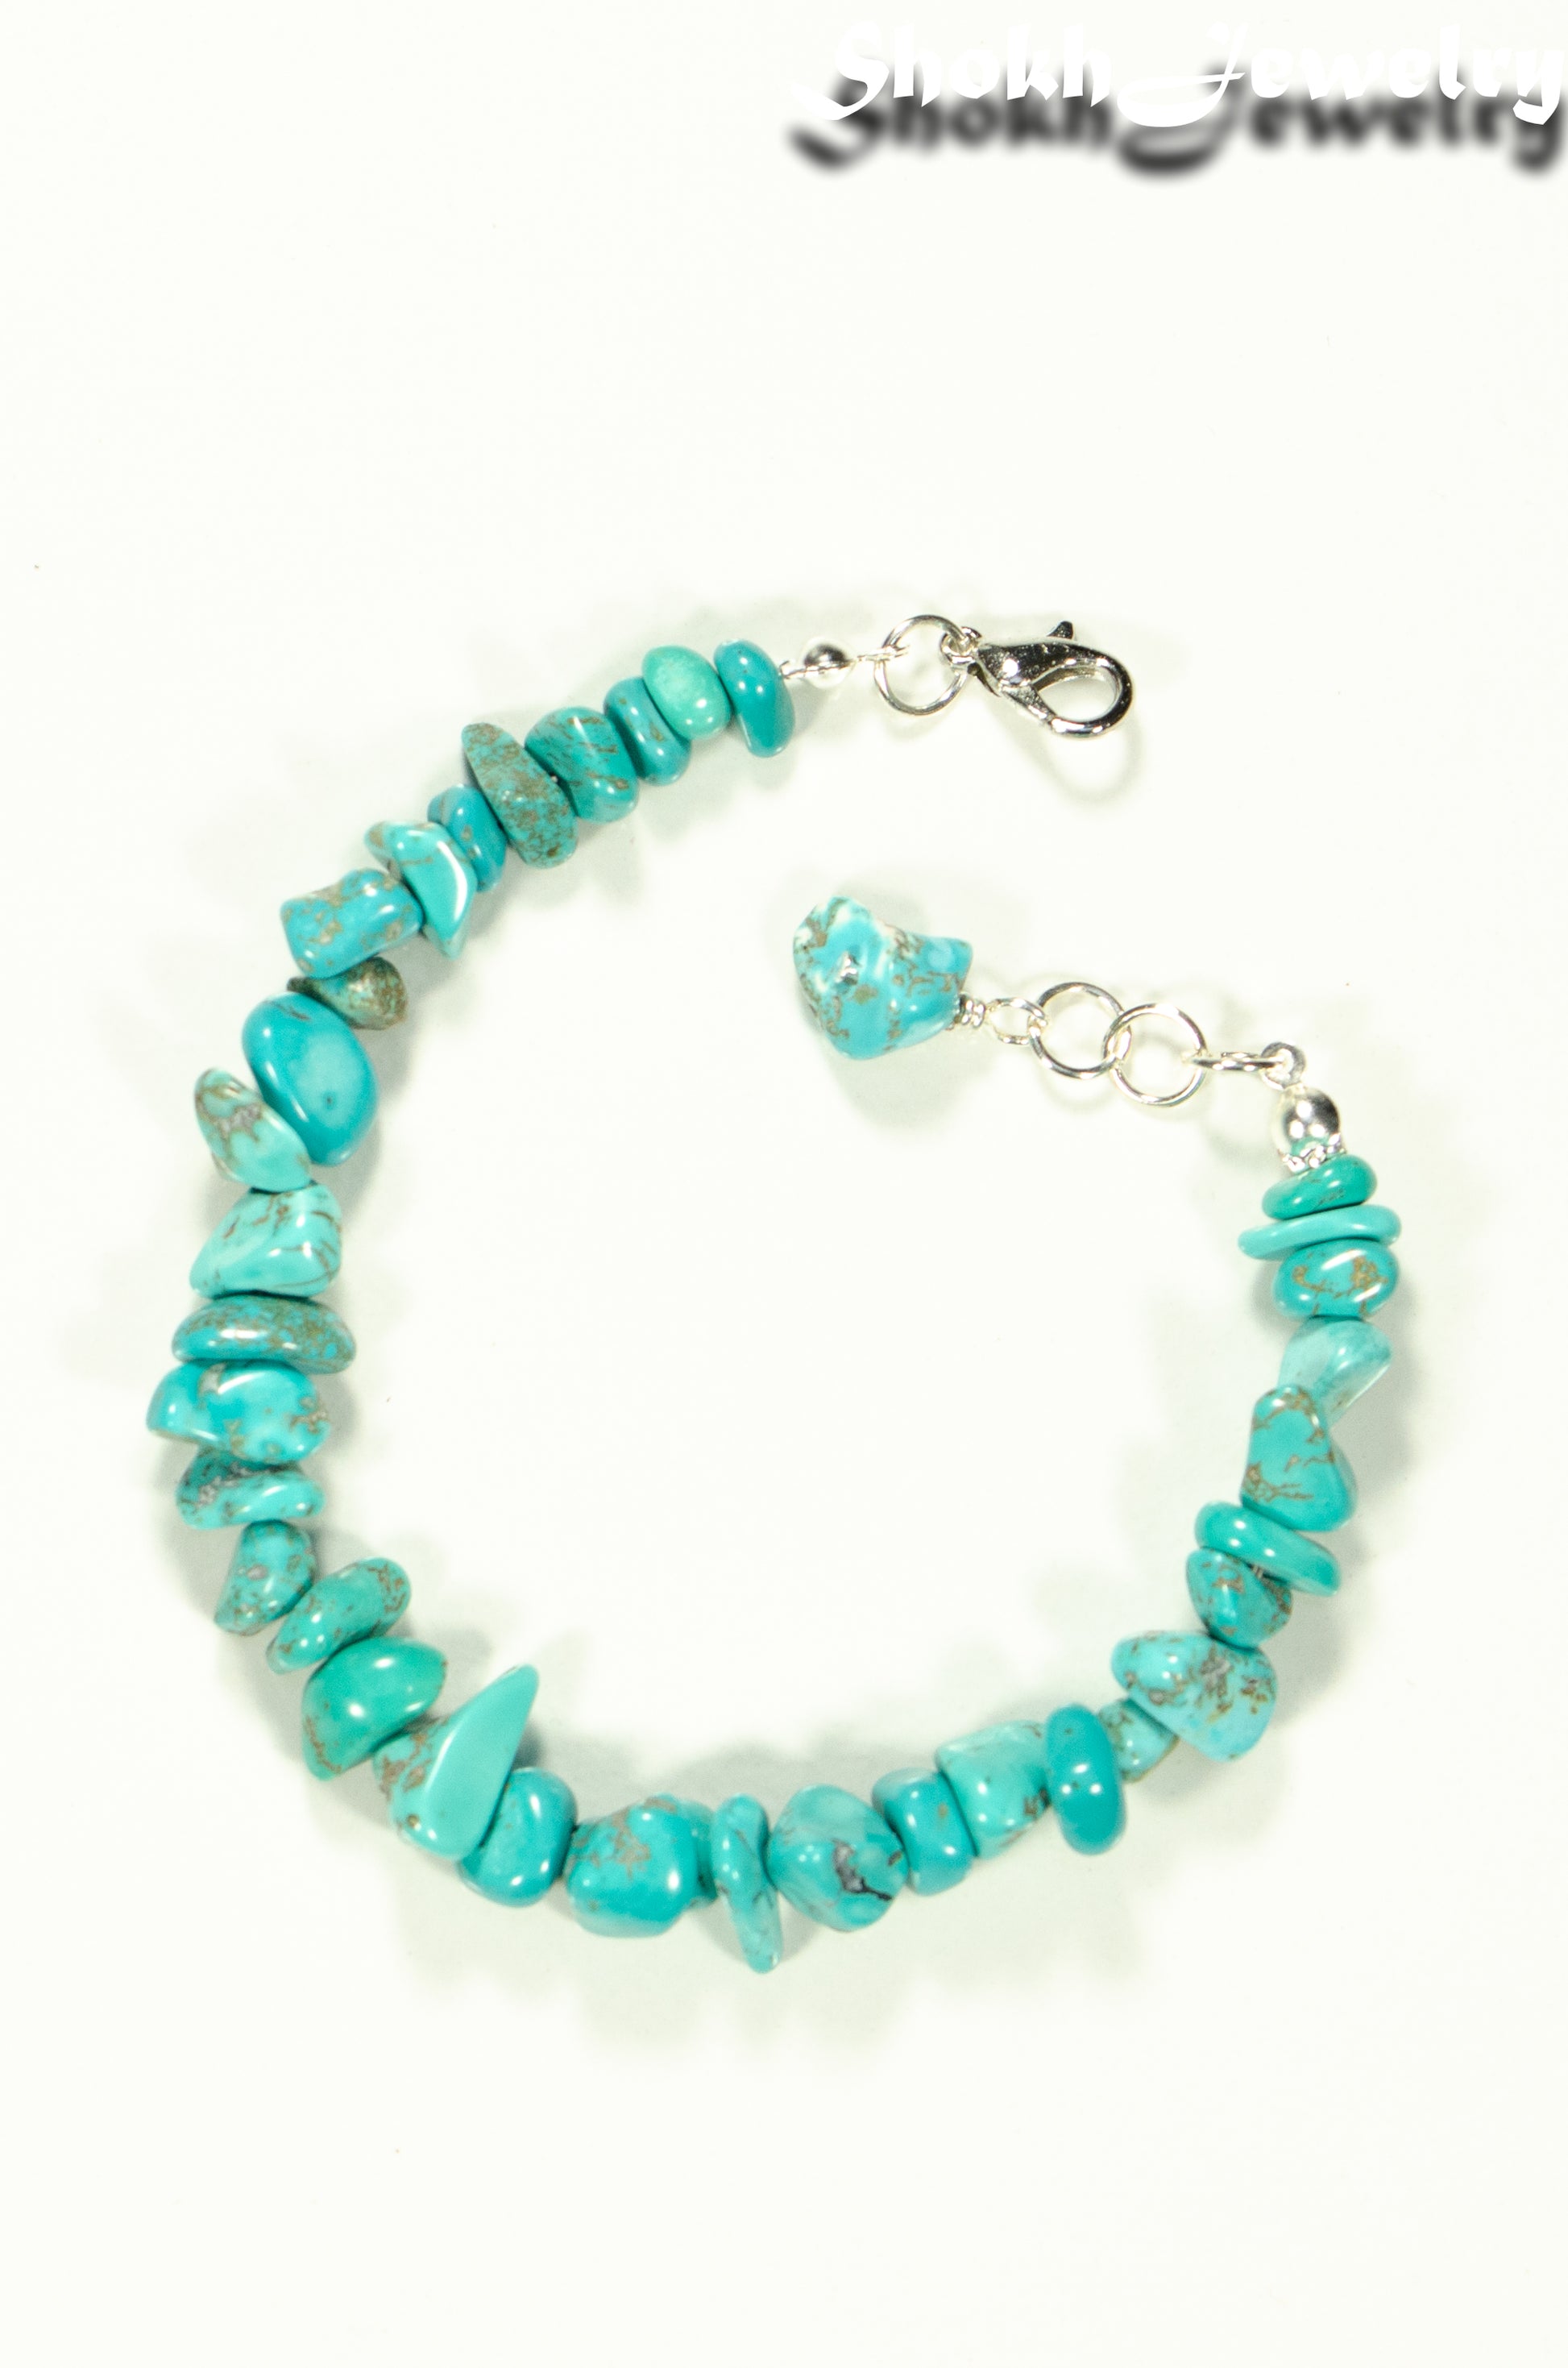 Natural Turquoise Crystal Chip Bracelet with lobster claw clasp.